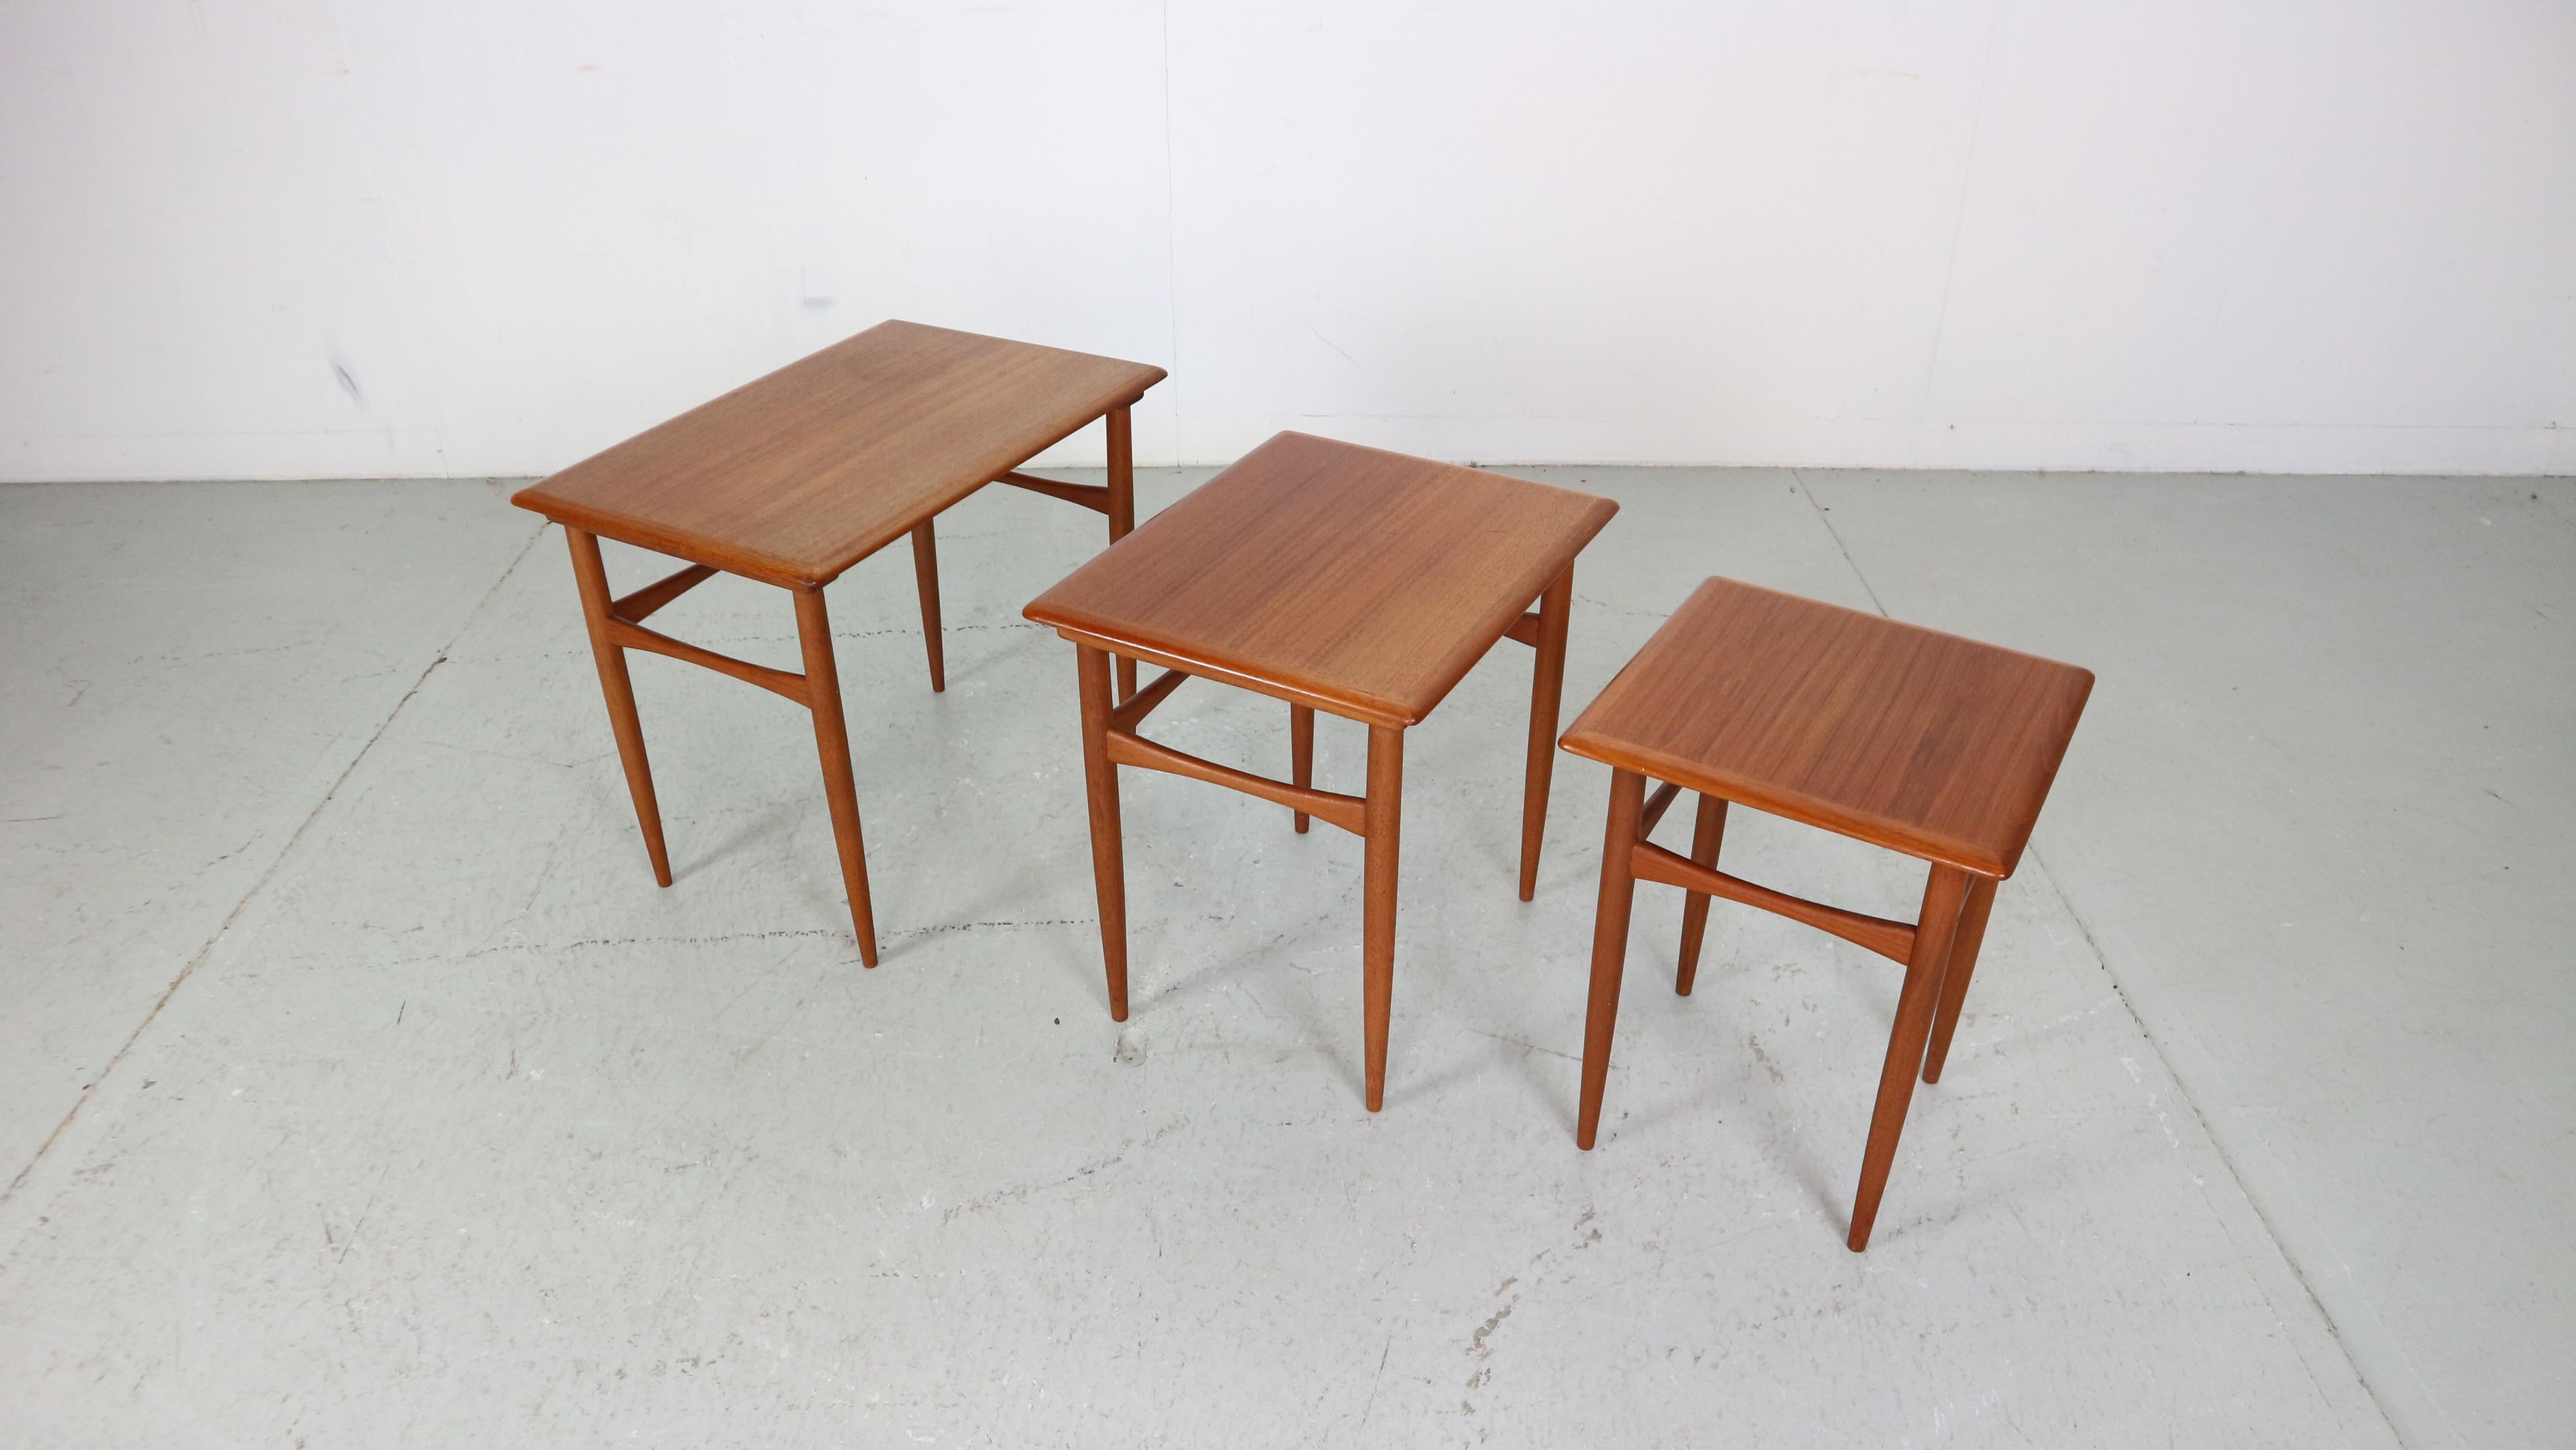 Vintage Danish design set of teak side tables designed by Kai Kristiansen. Stylish and practical by design, the tables easily slide in and out and make up little space if needed. A high quality Mid-century modern design that will gorgeously blend in